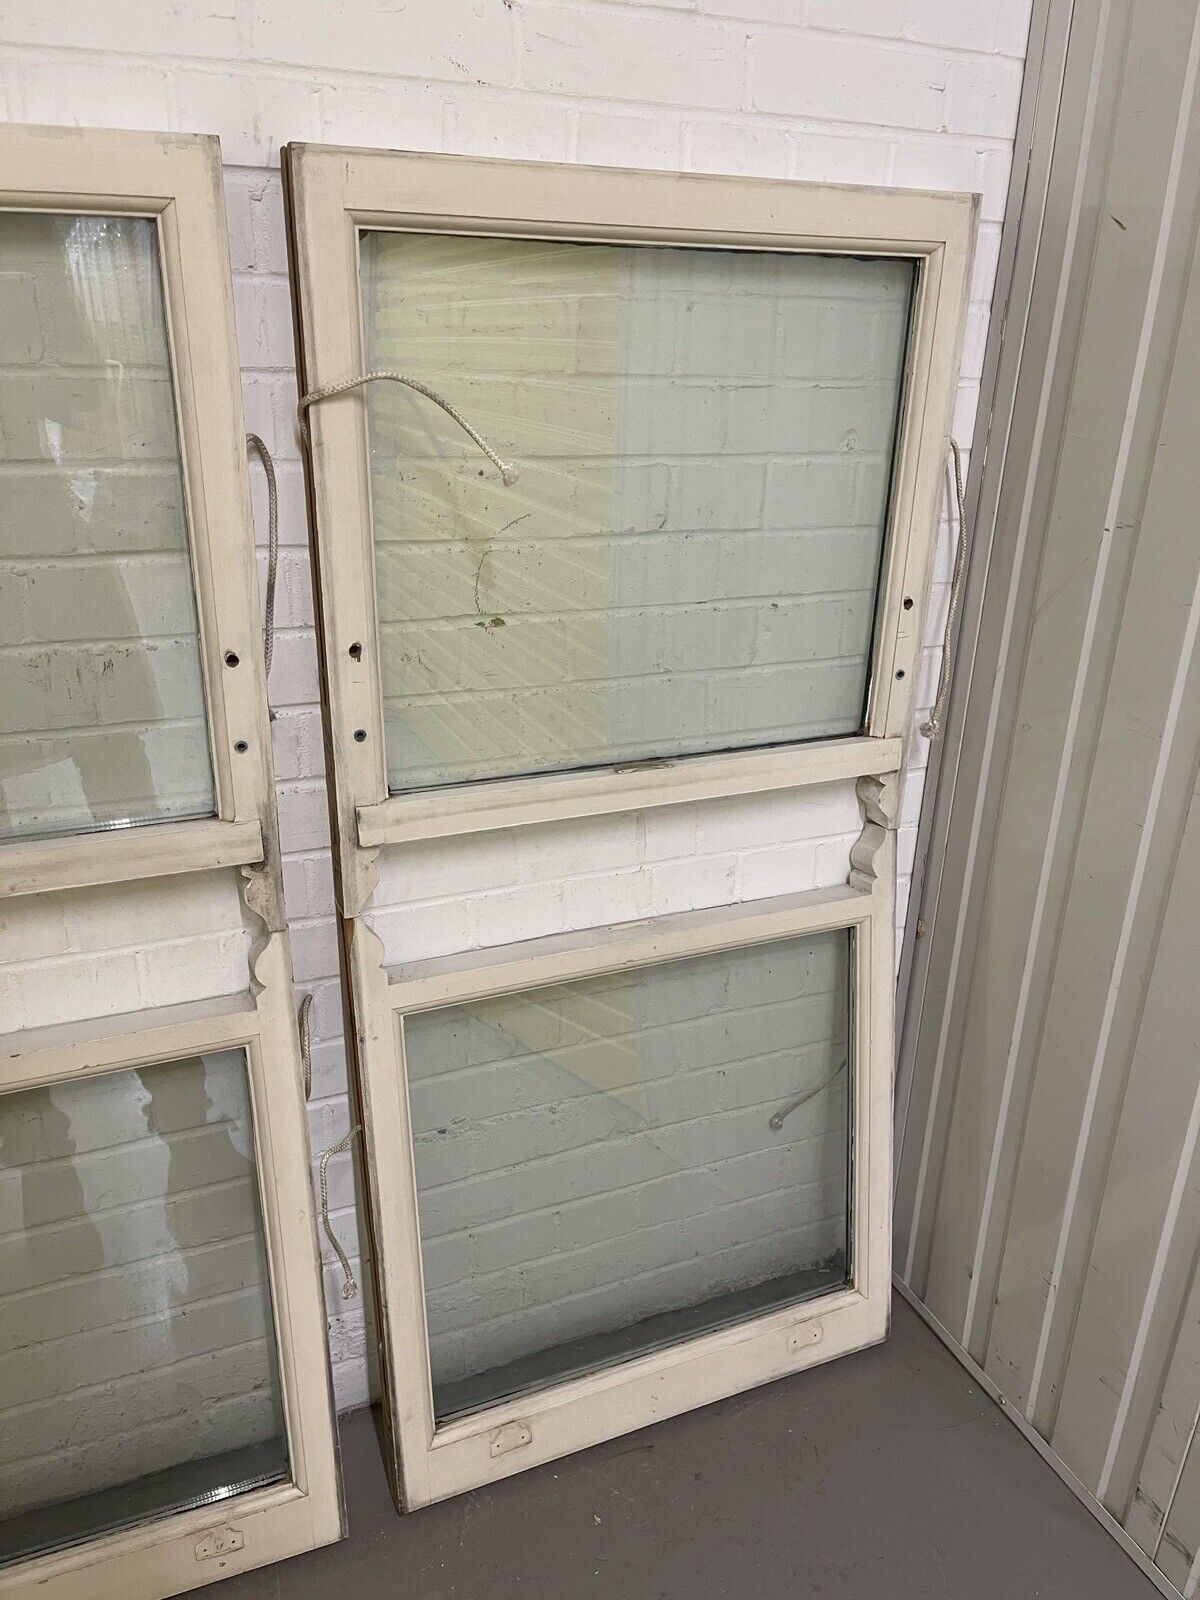 Two Pairs Of Double Glazed Wooden Sash Windows 683x690 680x713 684x690 680x715mm